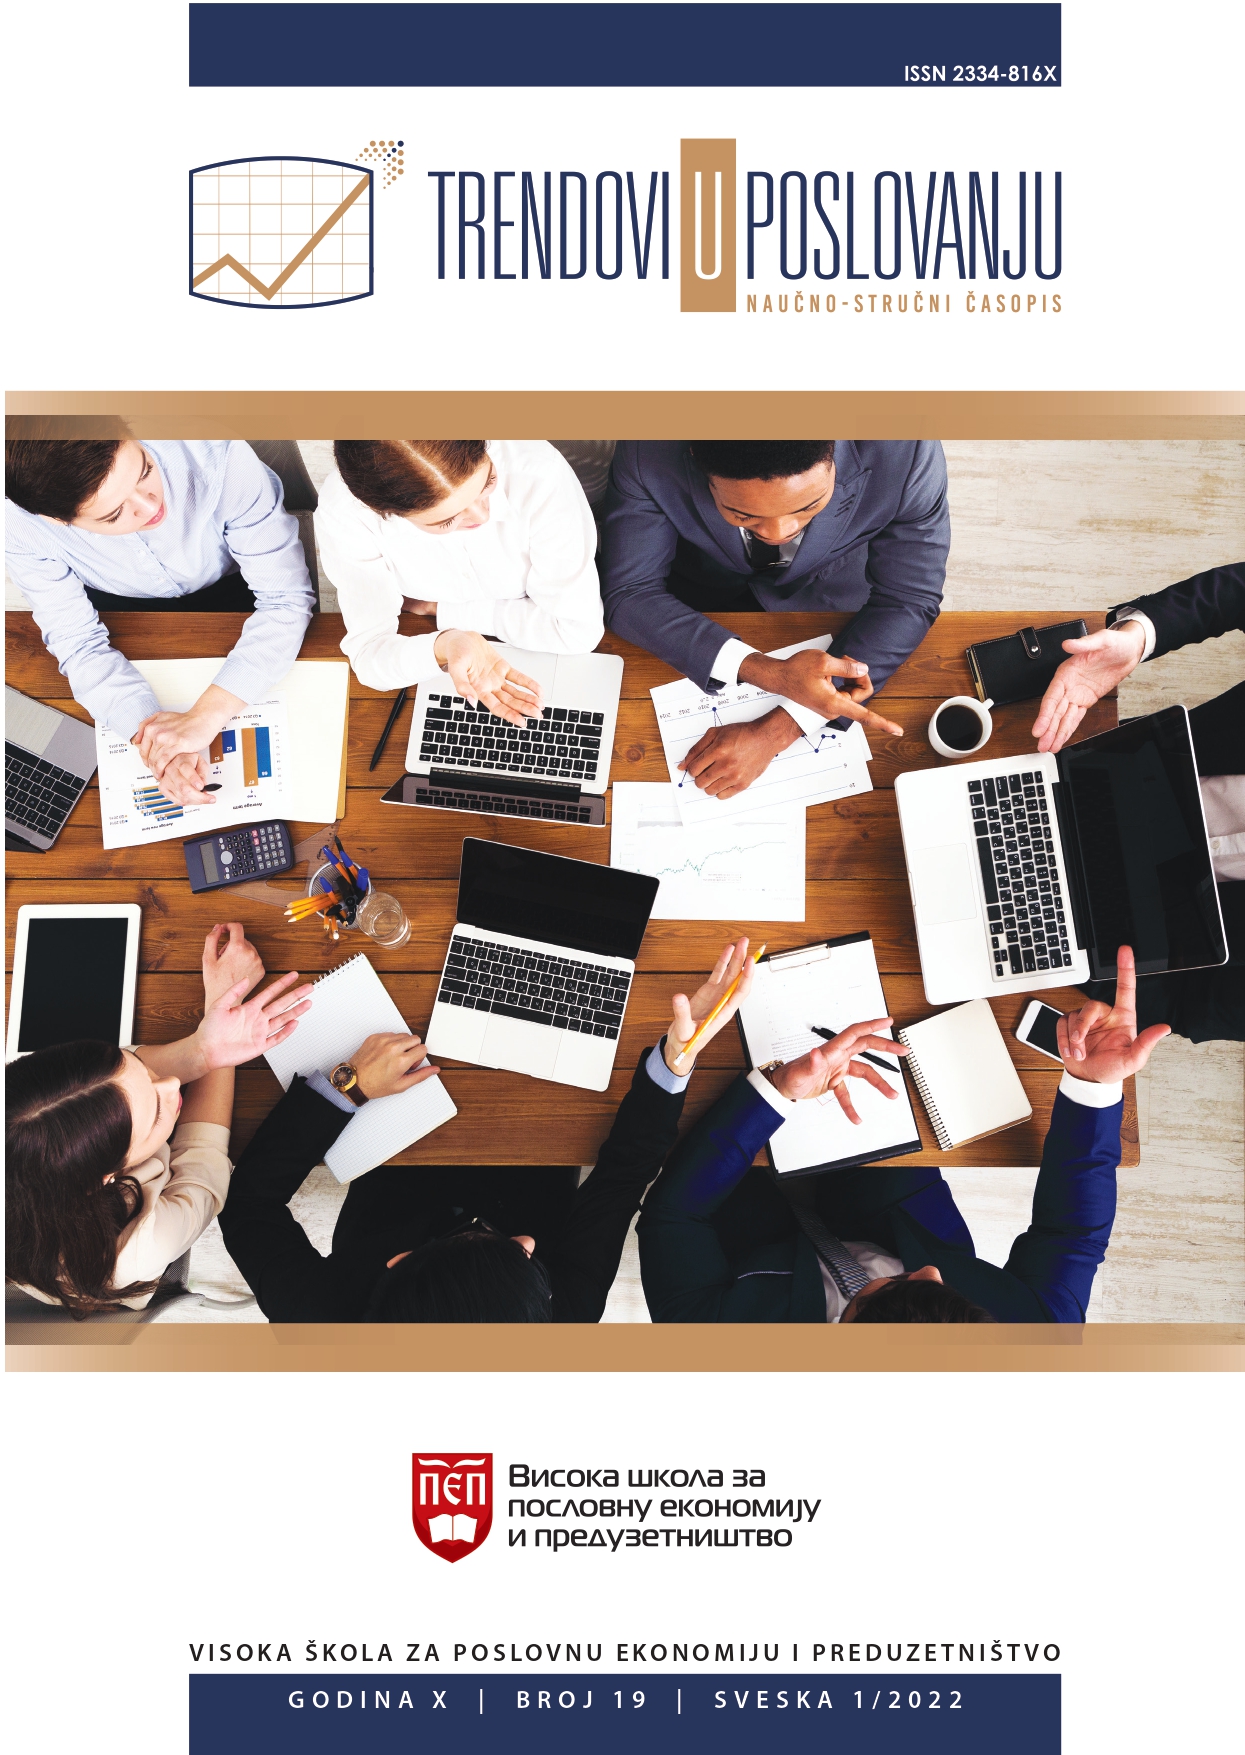 ETHICAL ASPECTS OF THE USE OF SOCIAL NETWORKS DURING THE EMPLOYMENT PROCESS Cover Image